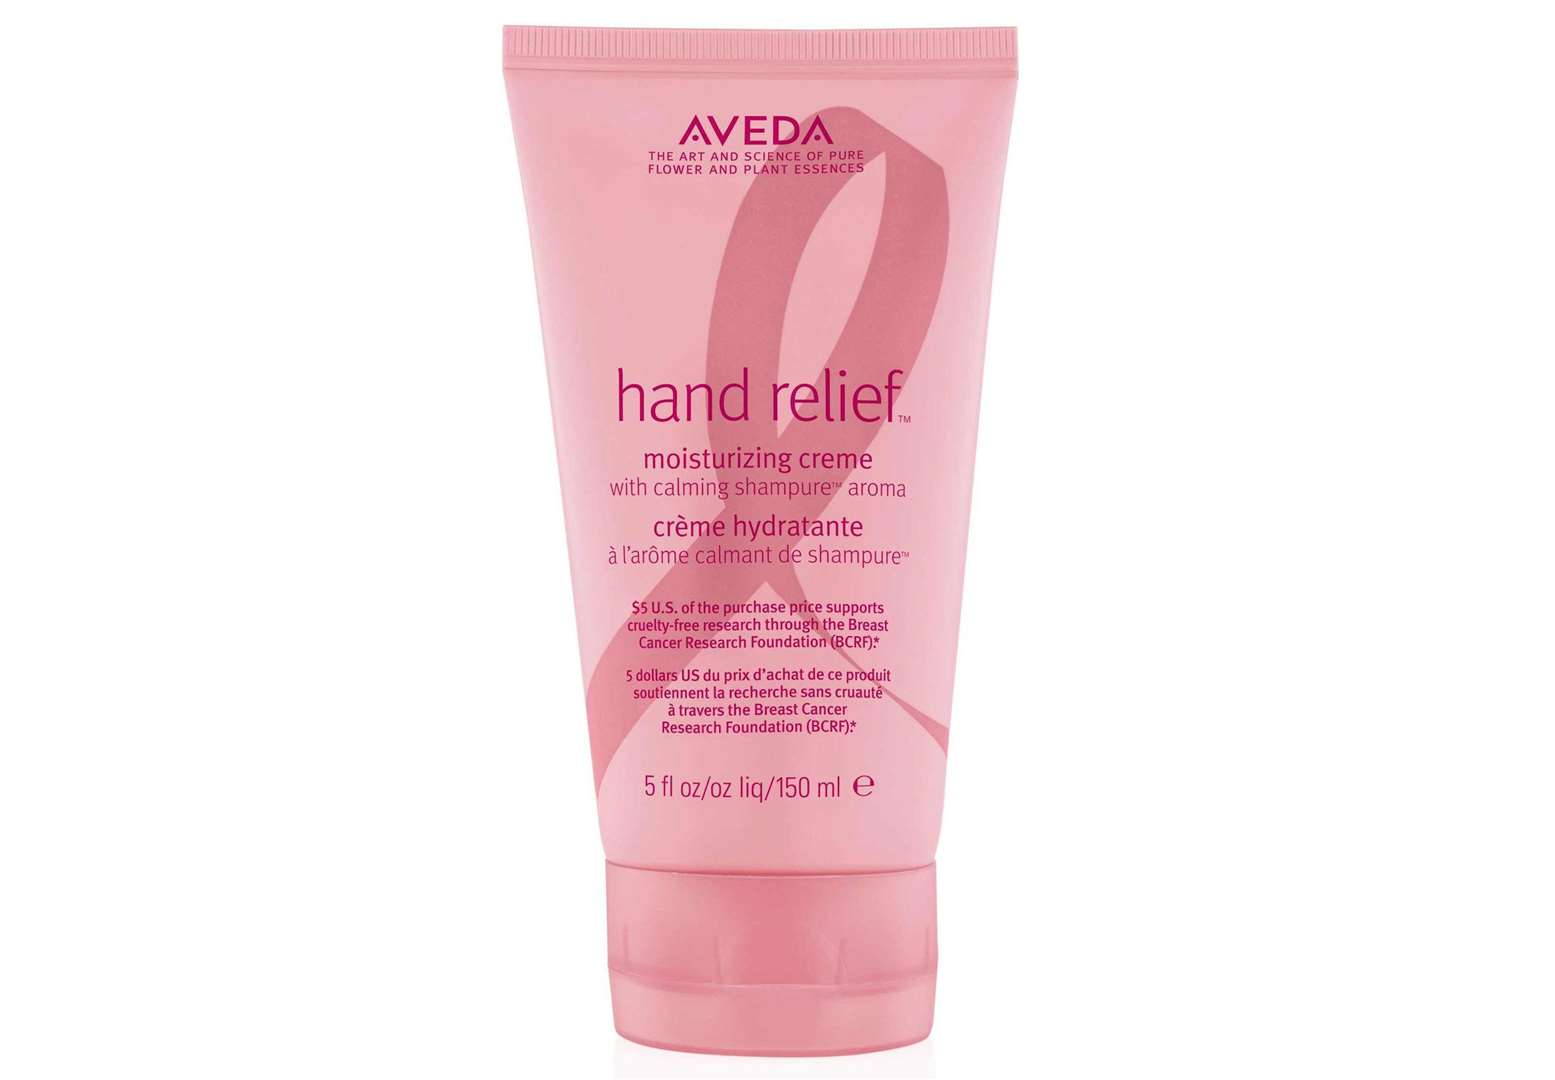 Aveda Limited Edition Hand Relief Moisturizing Creme